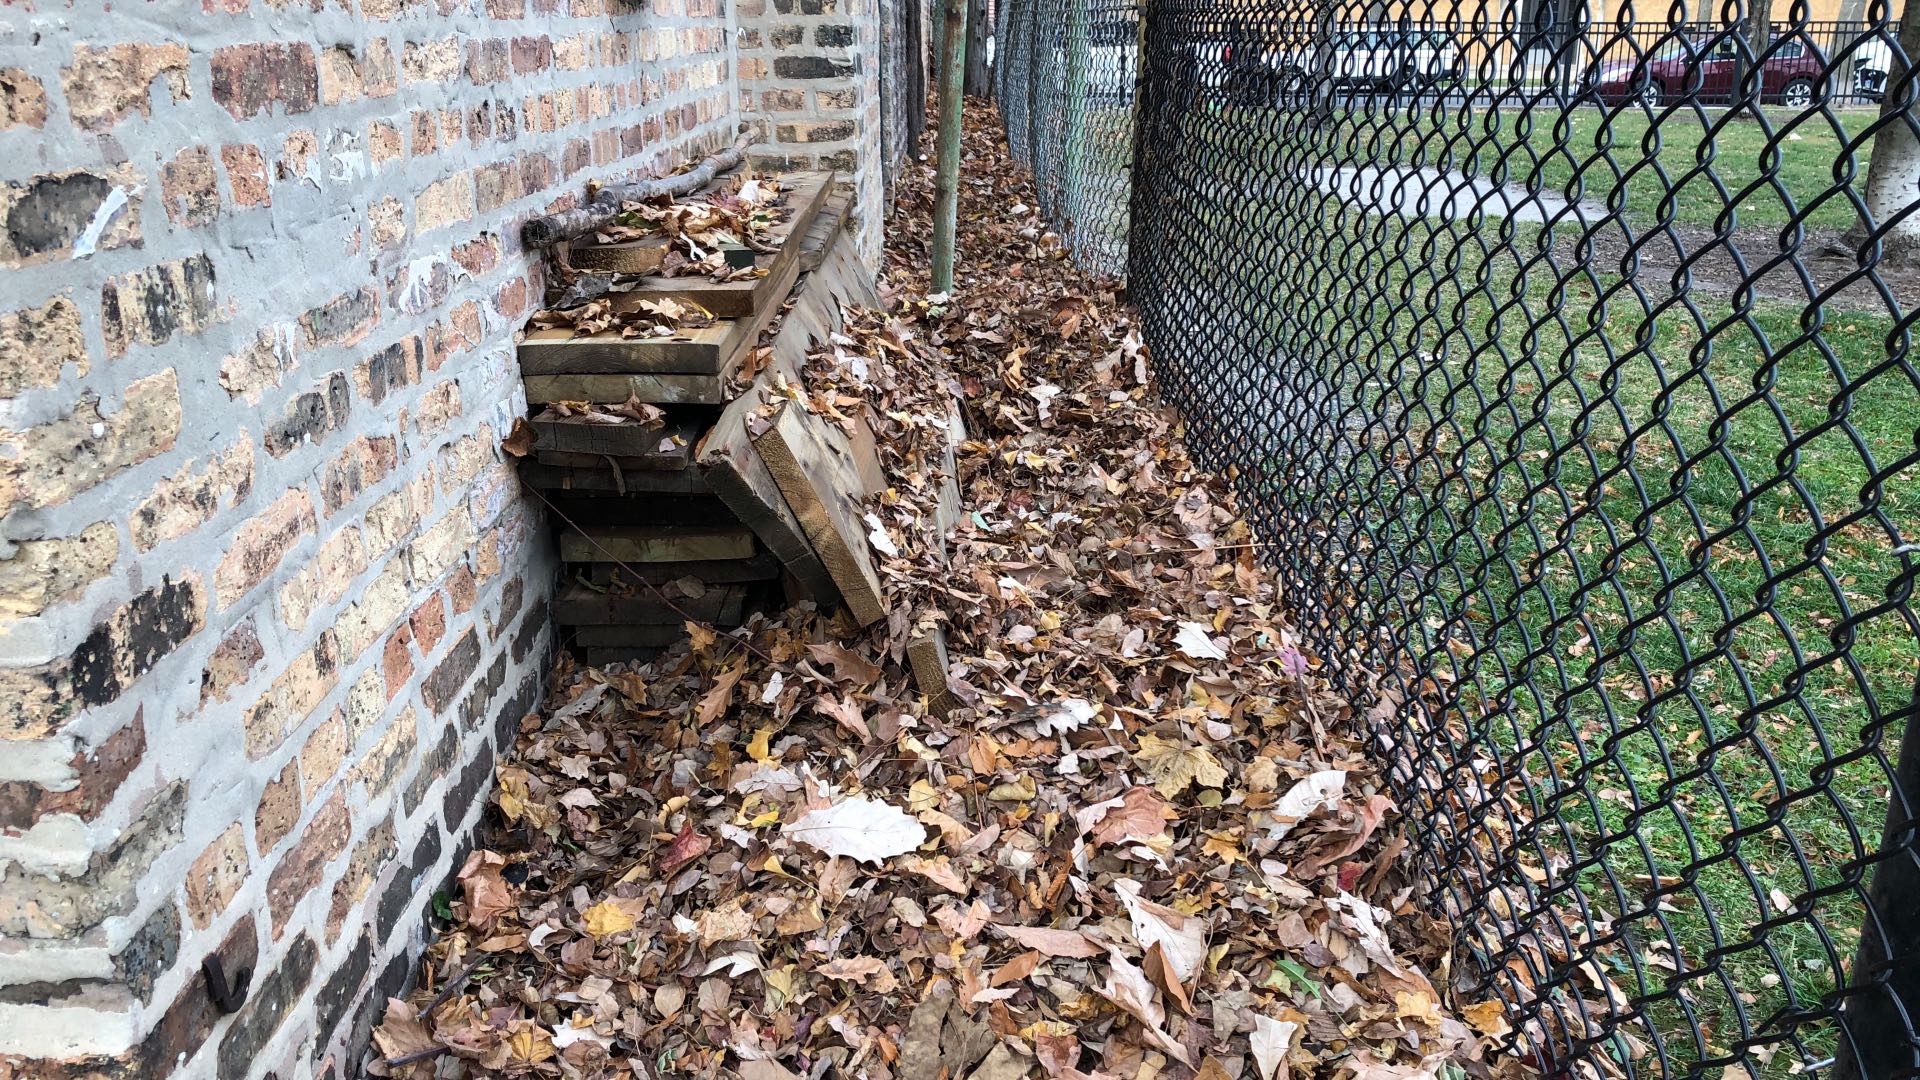 Leaves can be piled along a fence line, which will help contain them and keep them off sidewalks and out of sewers. (Patty Wetli / WTTW News)